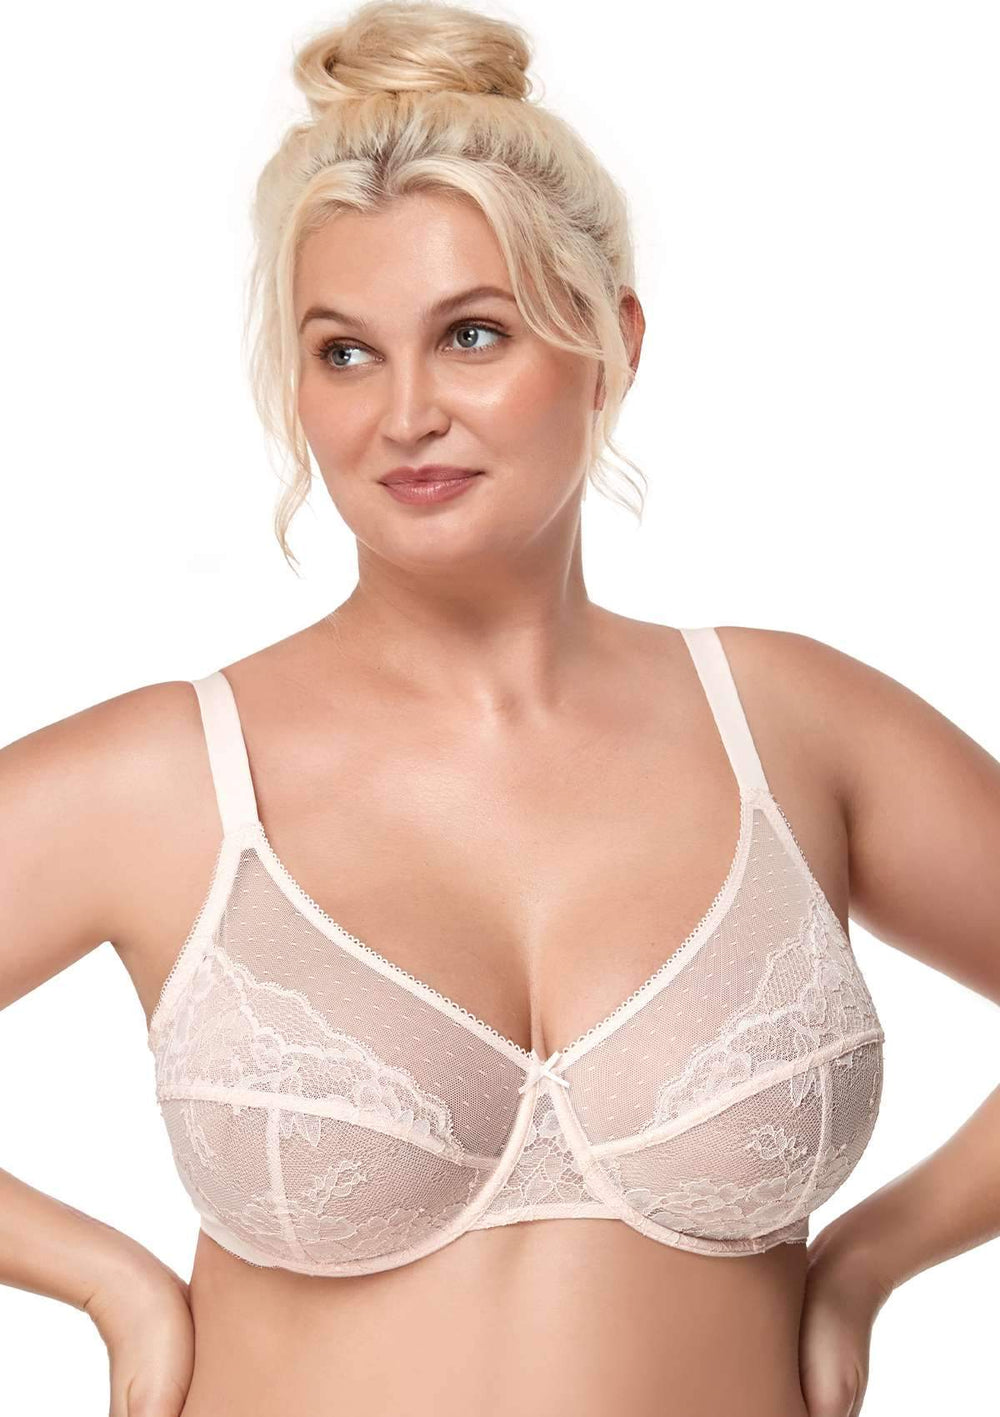 HUREDF Lace Privacy Invisible Bra,6 Pcs Cleavage Kuwait